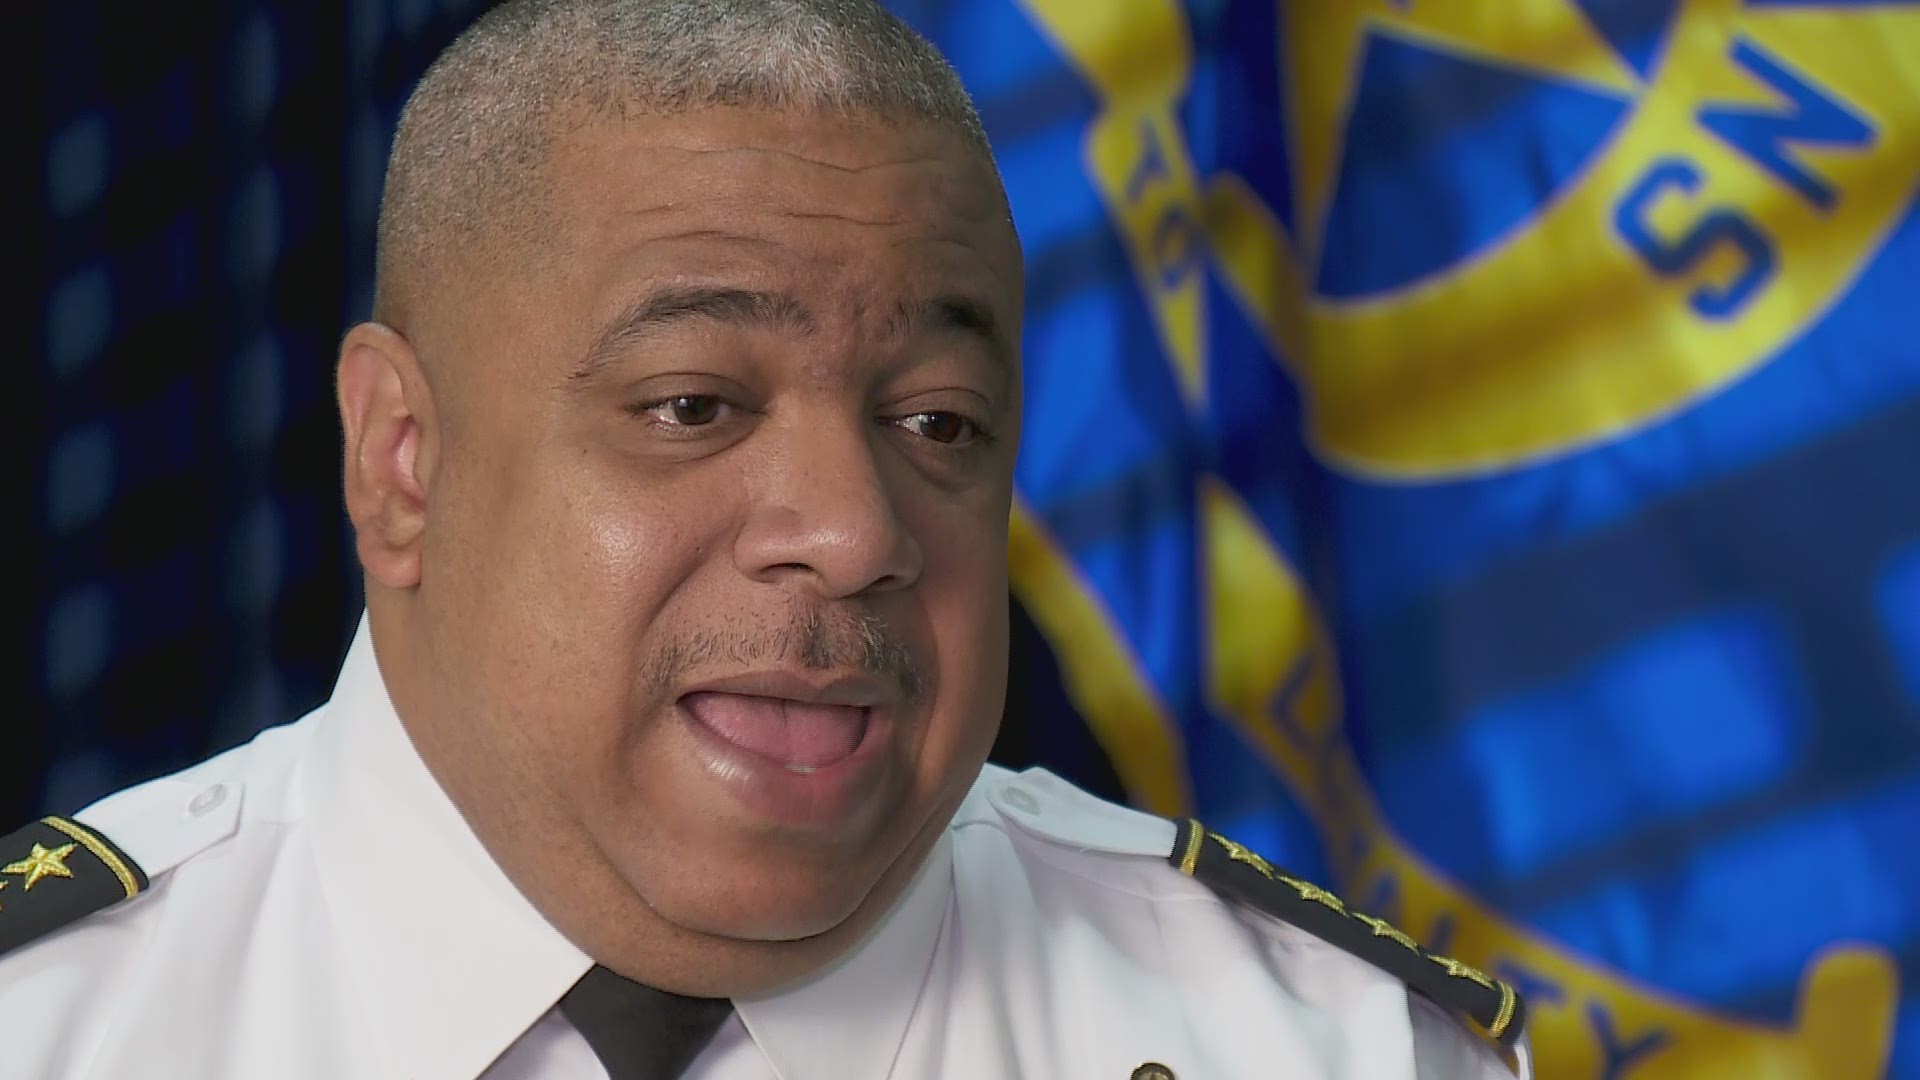 Chief Michael Harrison discusses the possibility of lost evidence due to long NOPD waiting times.